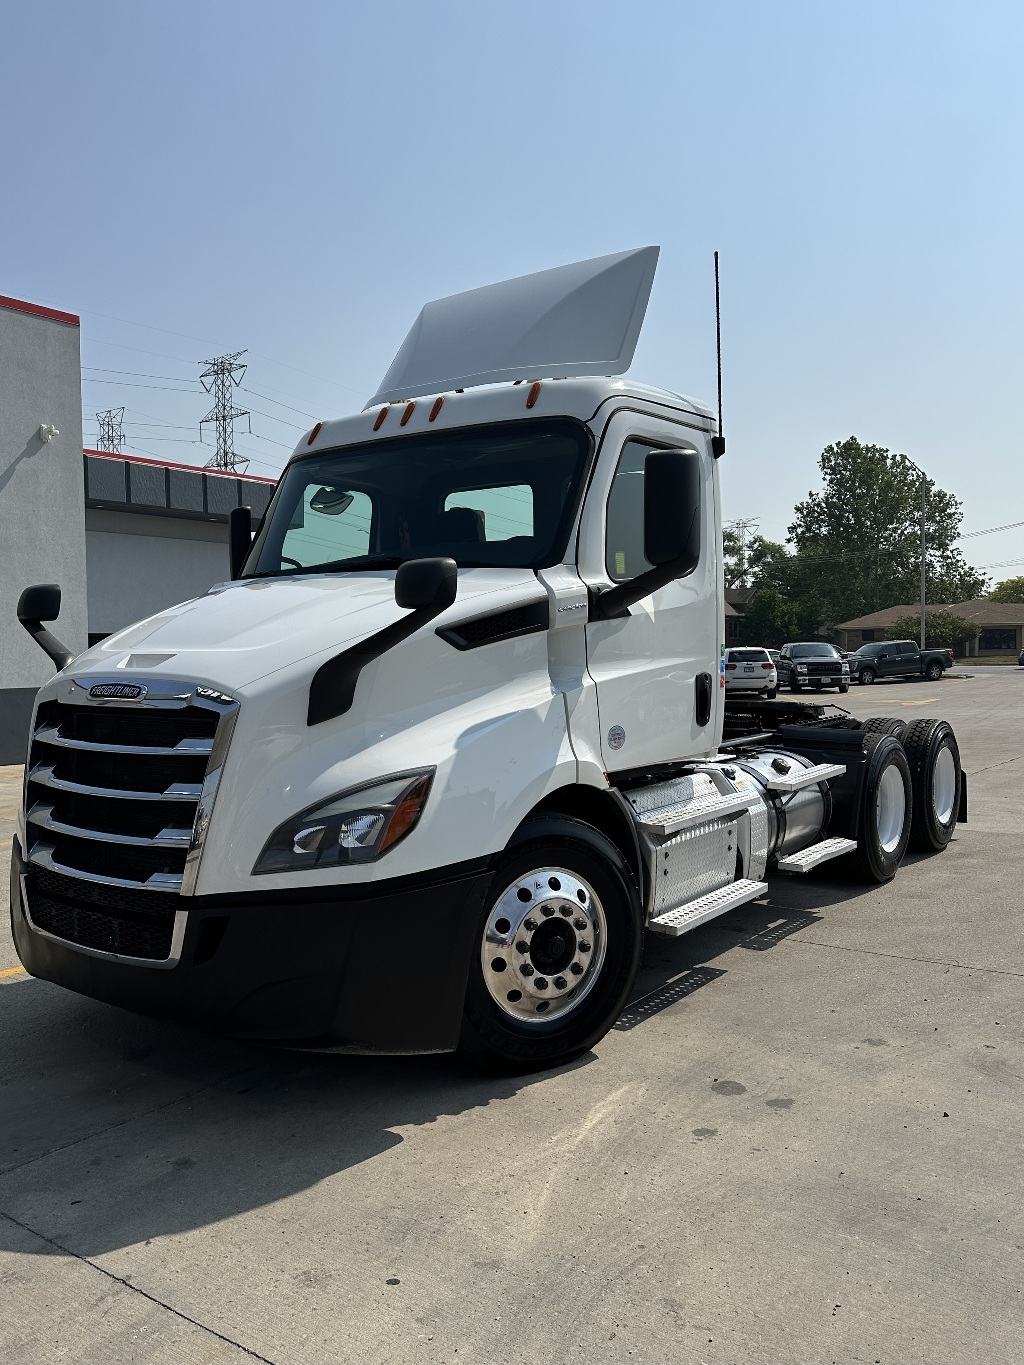 2018 FREIGHTLINER Cascadia Tandem Axle Daycab #1